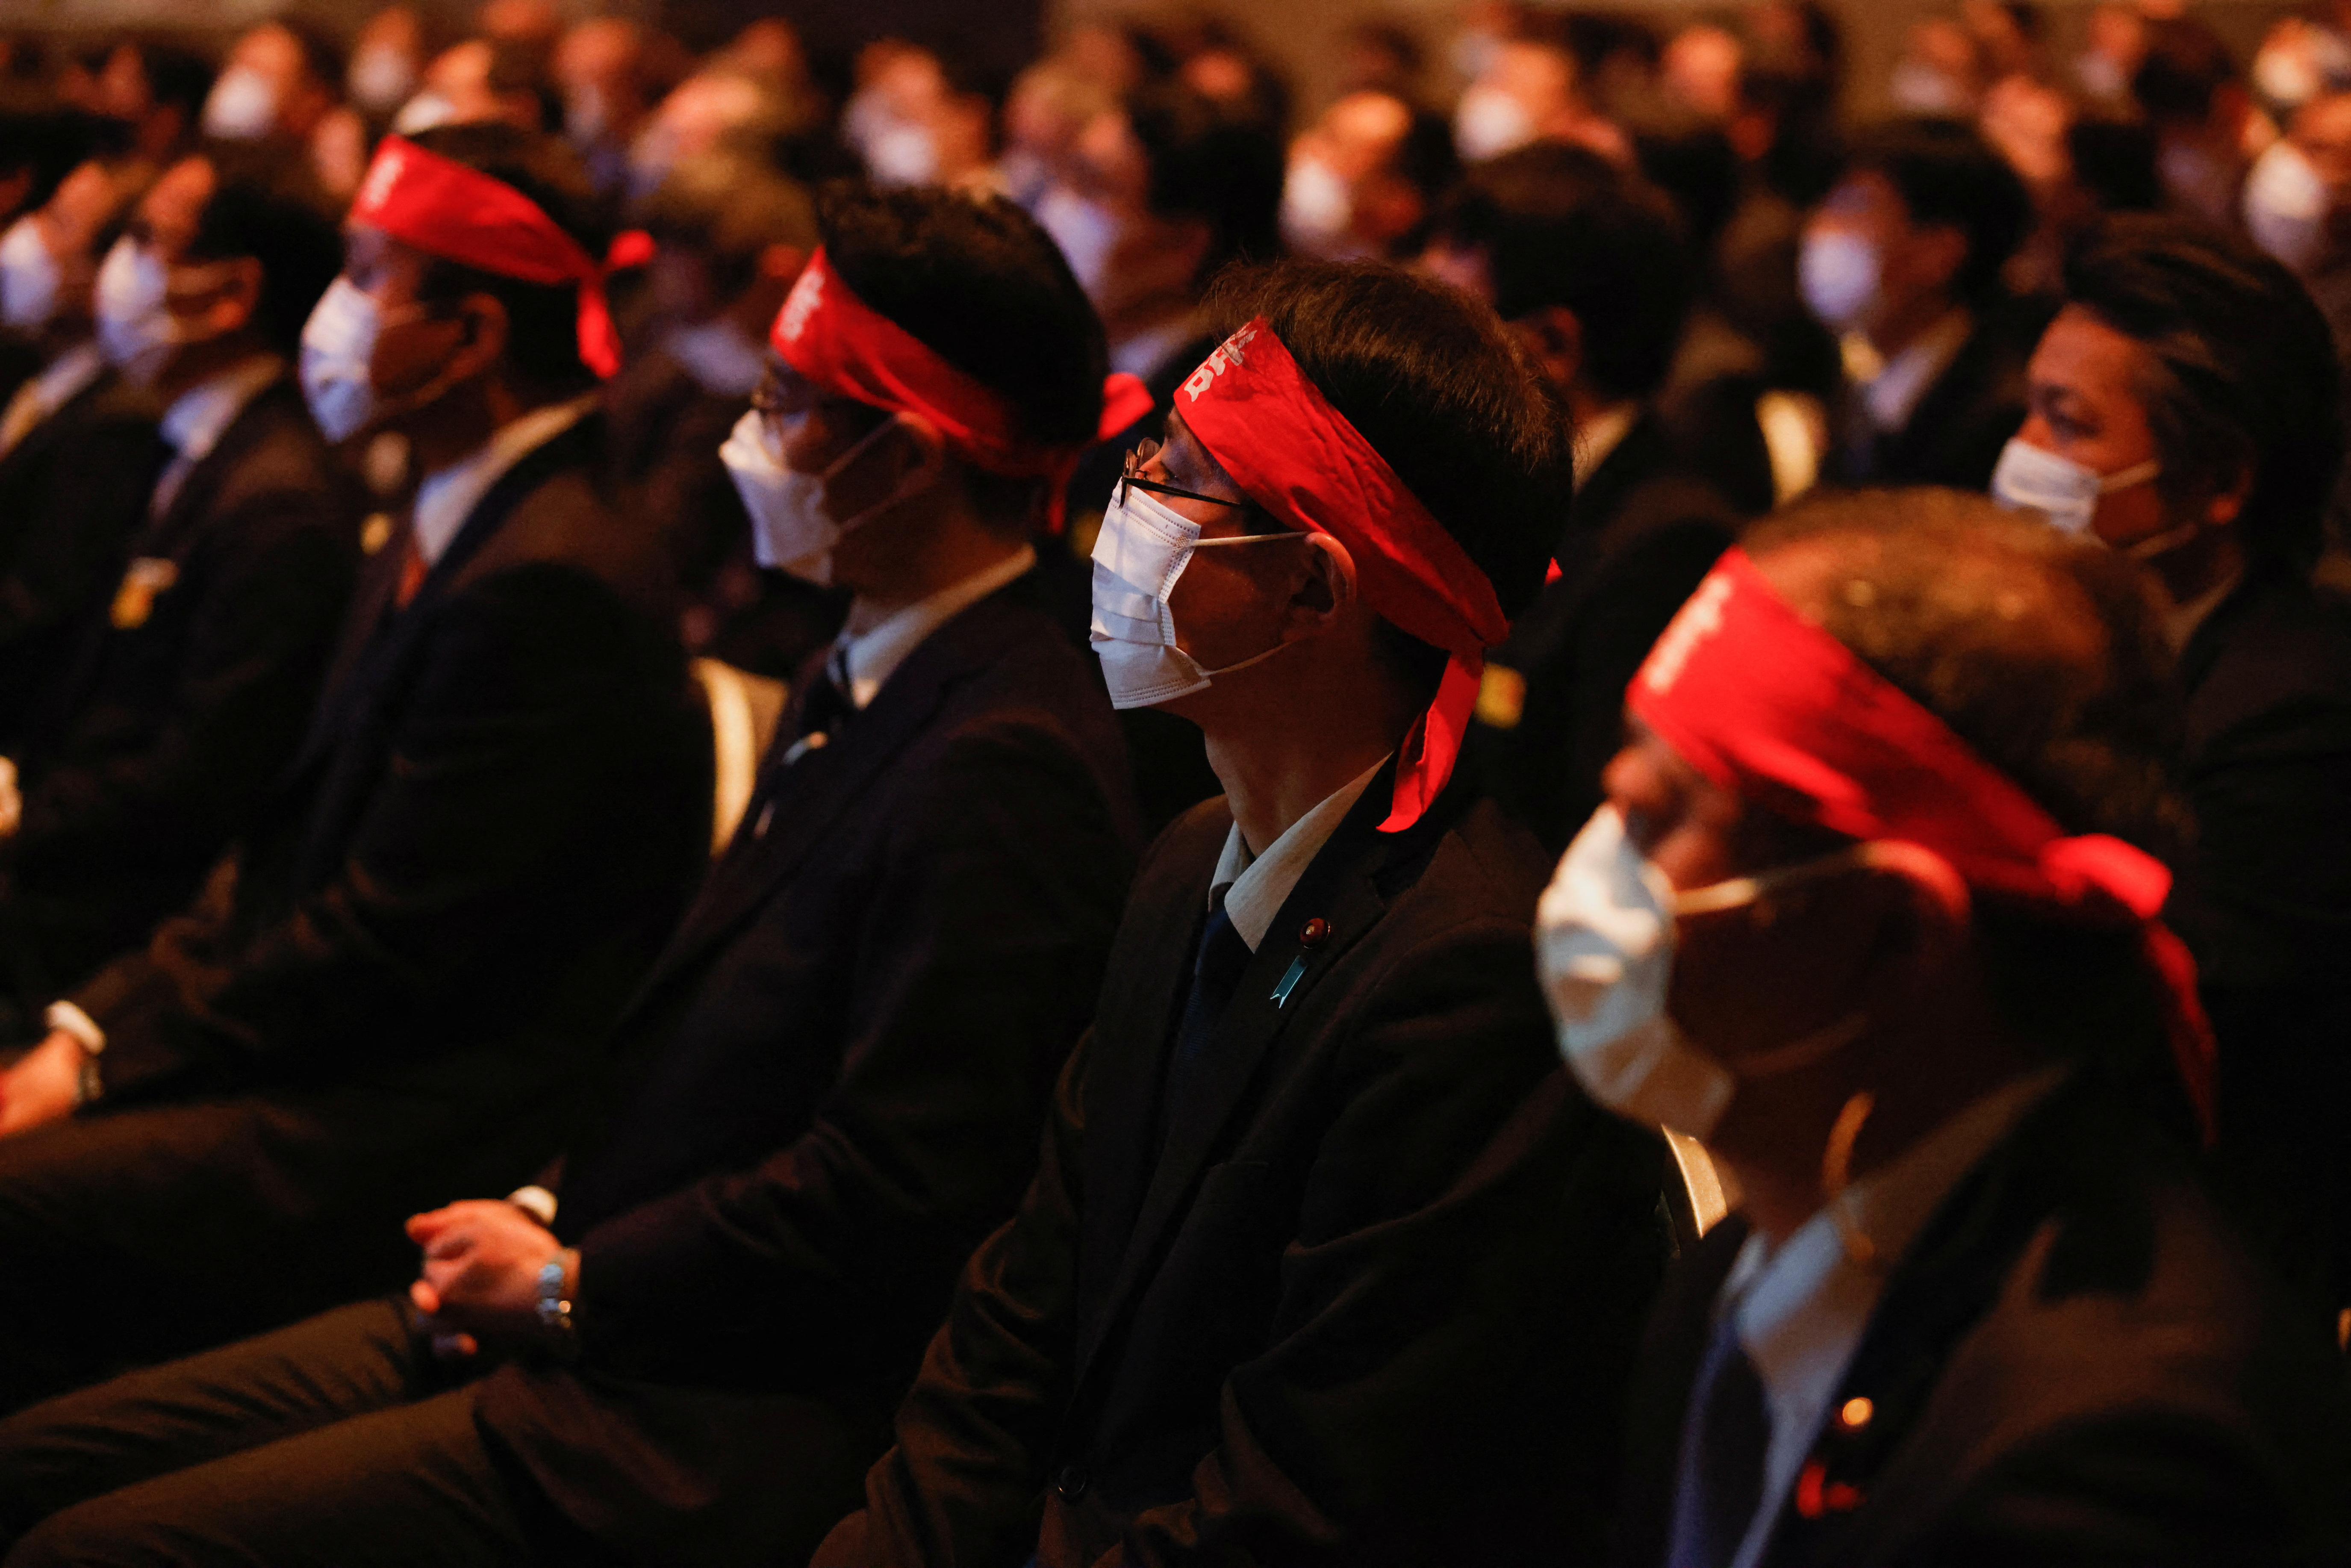 Members of UA Zensen watch a video, during a kick-off rally for the annual "shunto" wage negotiations in Tokyo